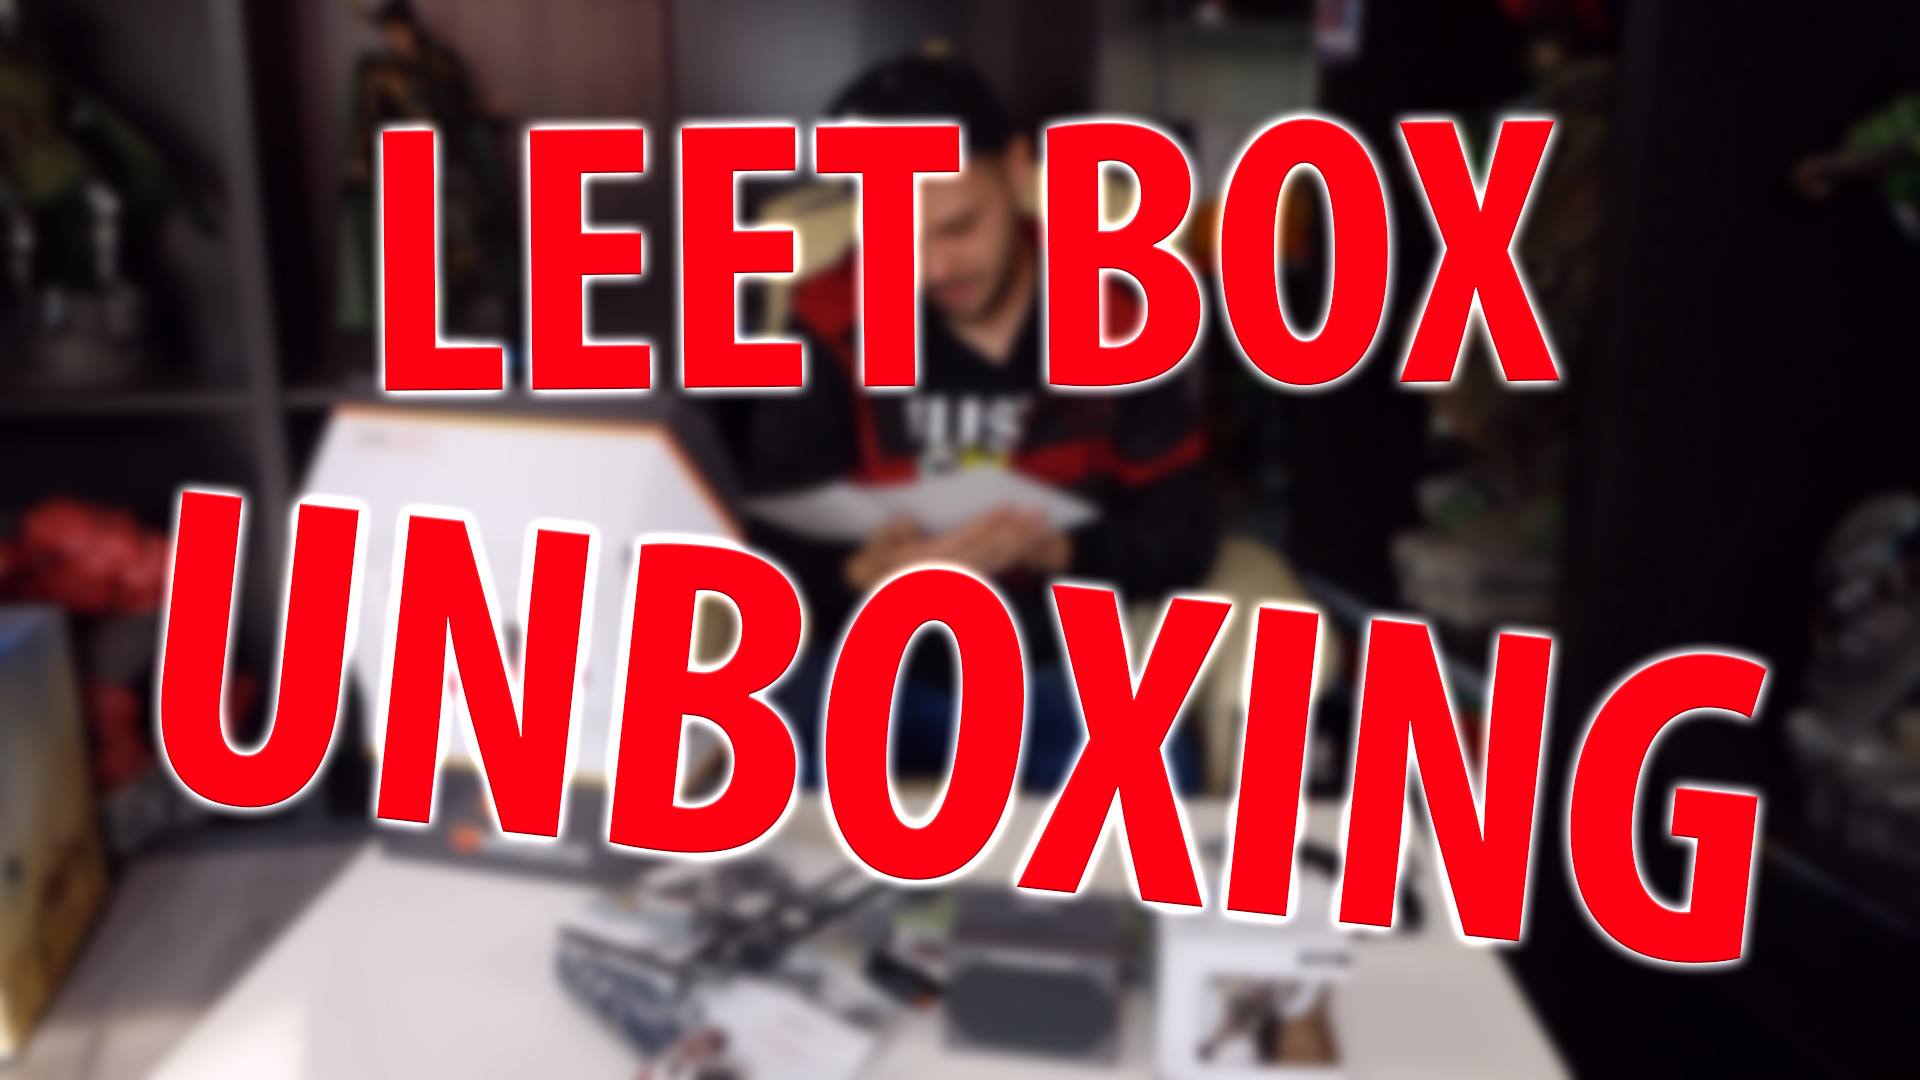 UNBOXING - LEET-BOX IN THE SHADOW GAMLERY